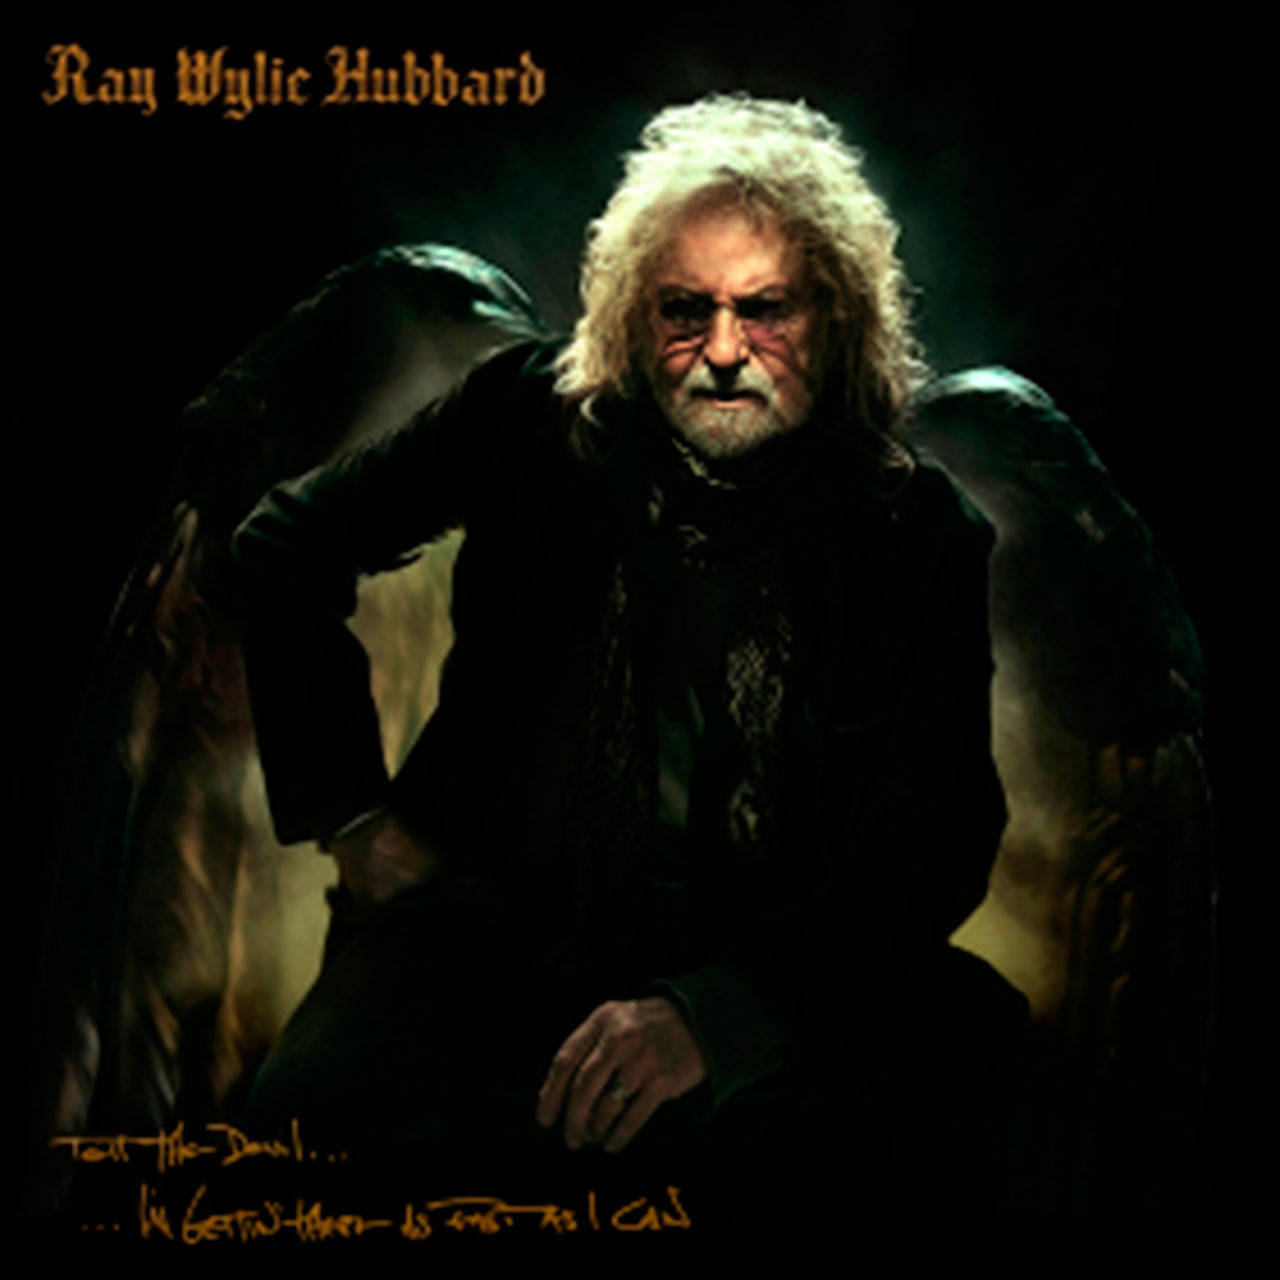 Image courtesy of Ray Wylie Hubbard                                Renowned outlaw country musician Ray Wylie Hubbard will celebrate the release of his latest album, “Tell the Devil I’m Getting There as Fast as I Can,” with a two-night concert event at 8 p.m. the Treehouse Café Friday, Aug. 4 and Saturday, Aug. 5.